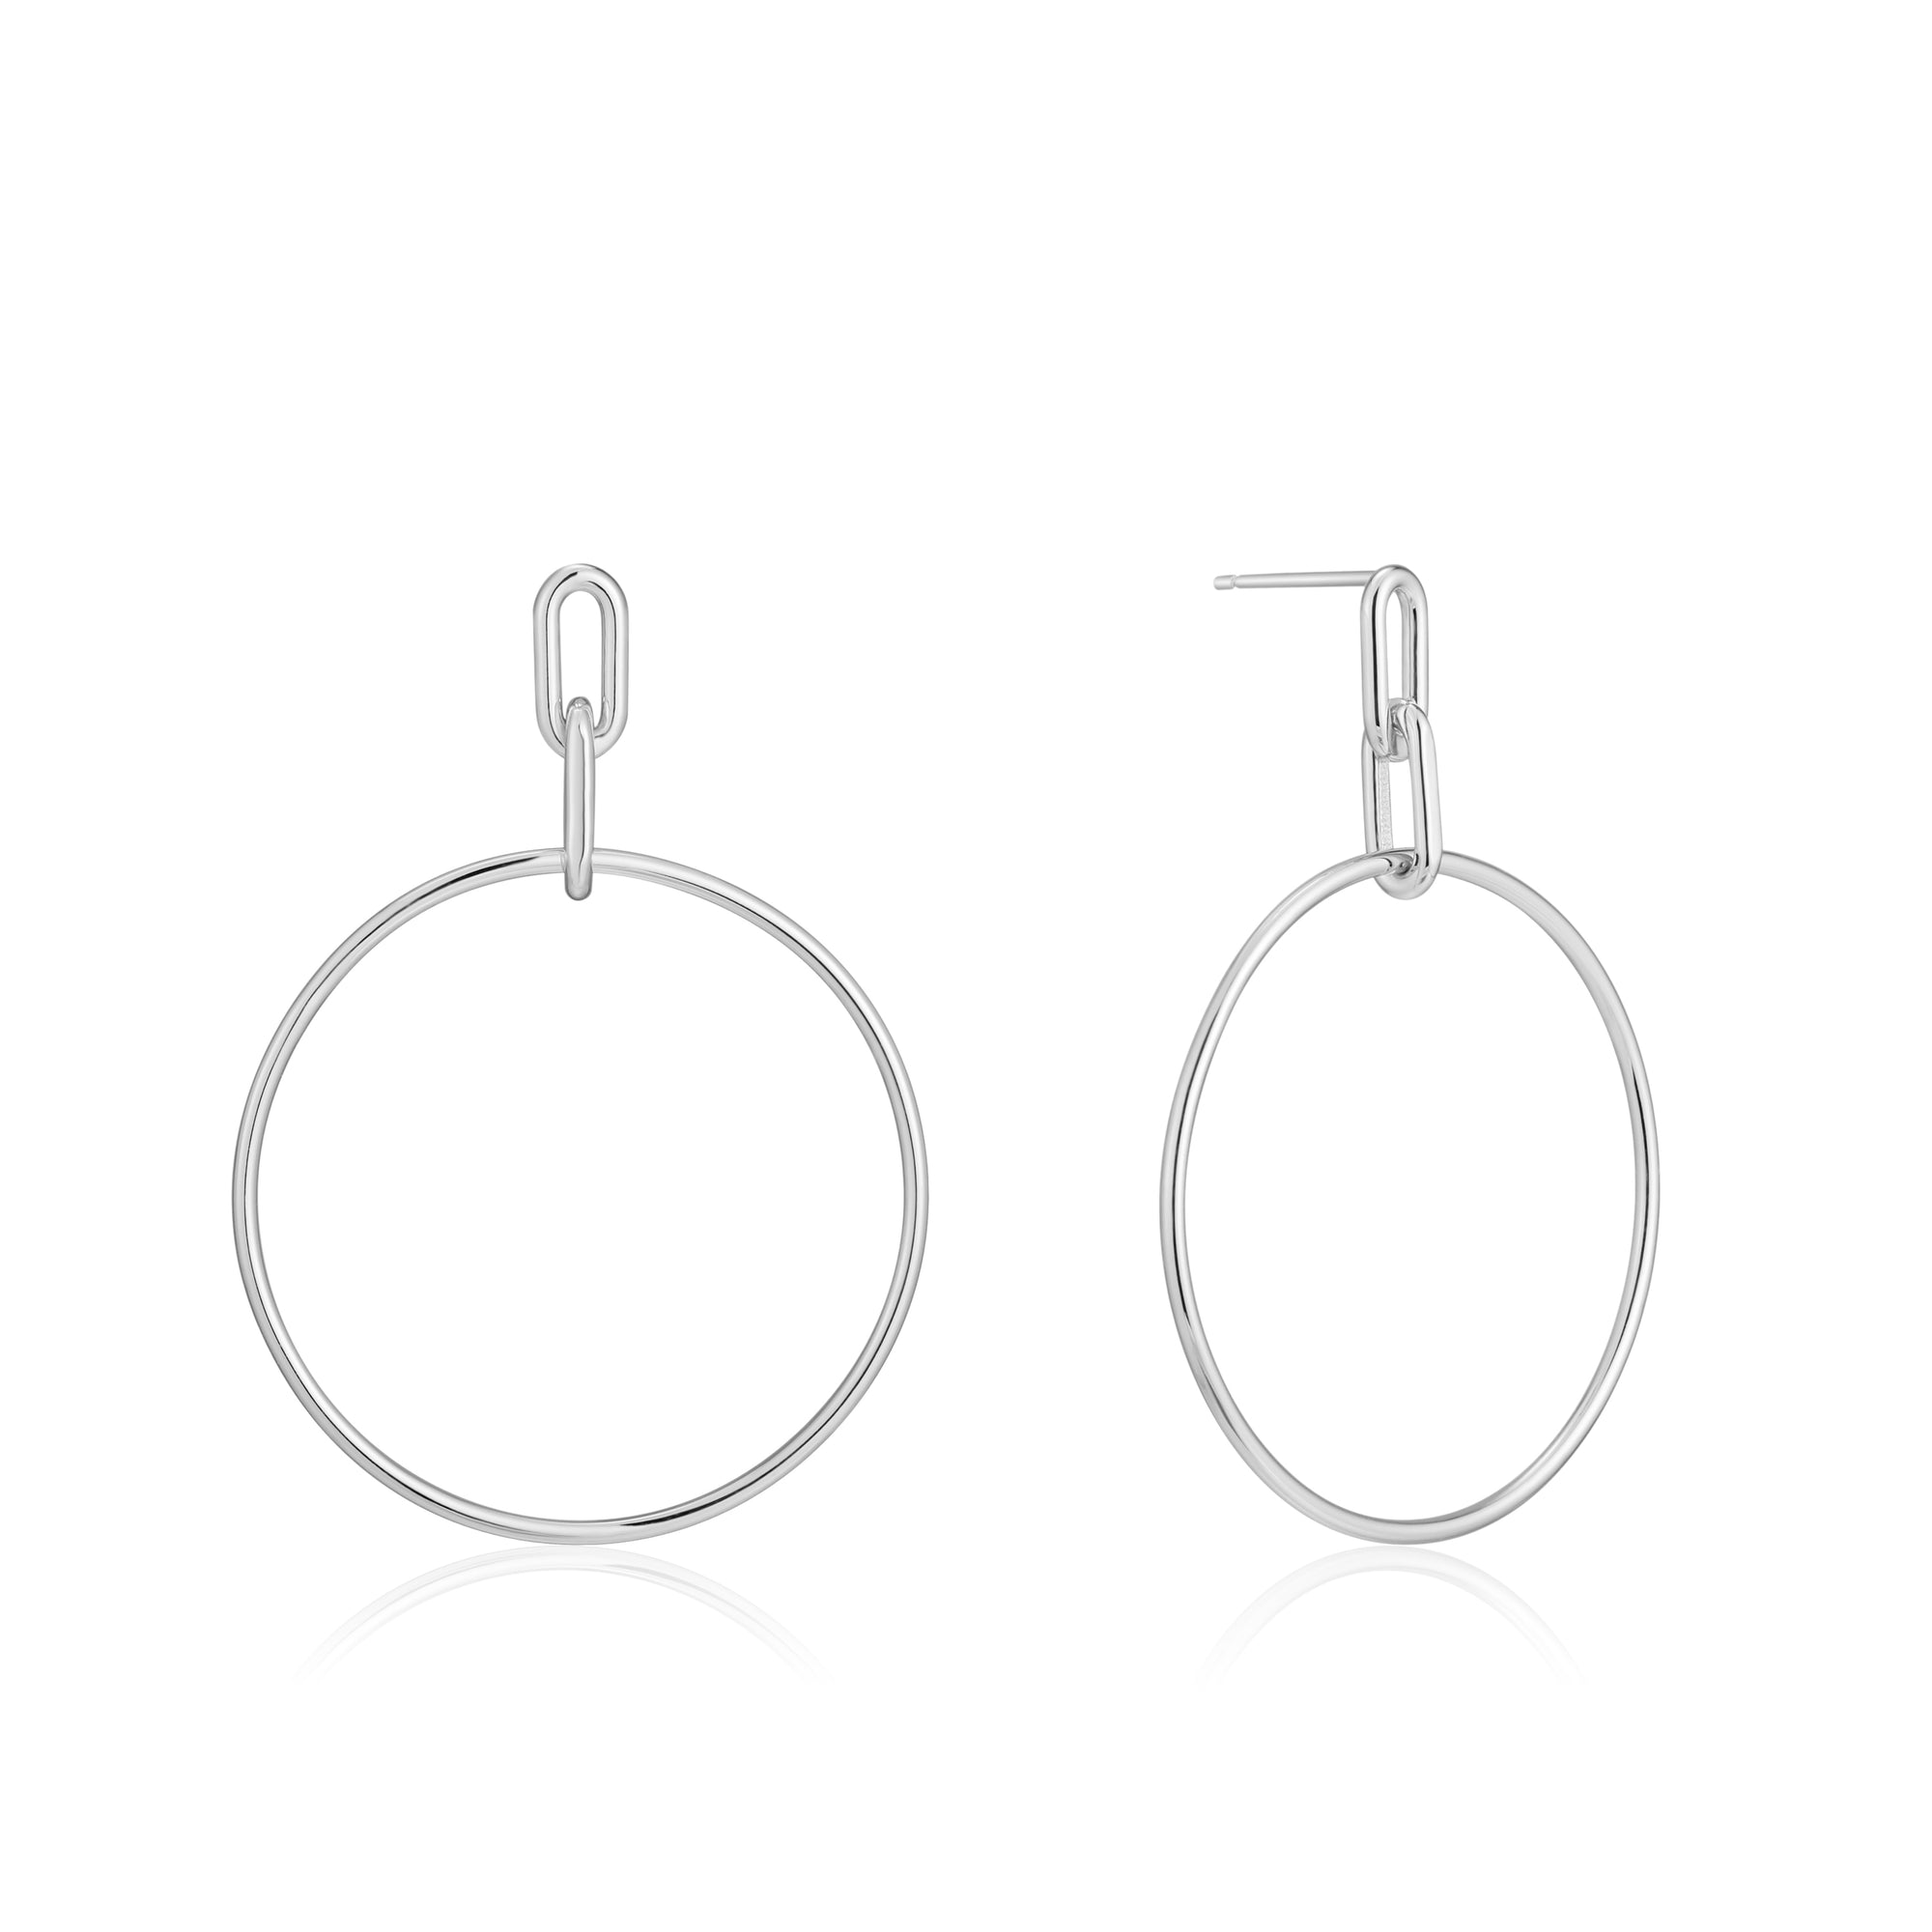 ANIA HAIE ANIA HAIE - Silver Cable Link Hoop Earrings available at The Good Life Boutique